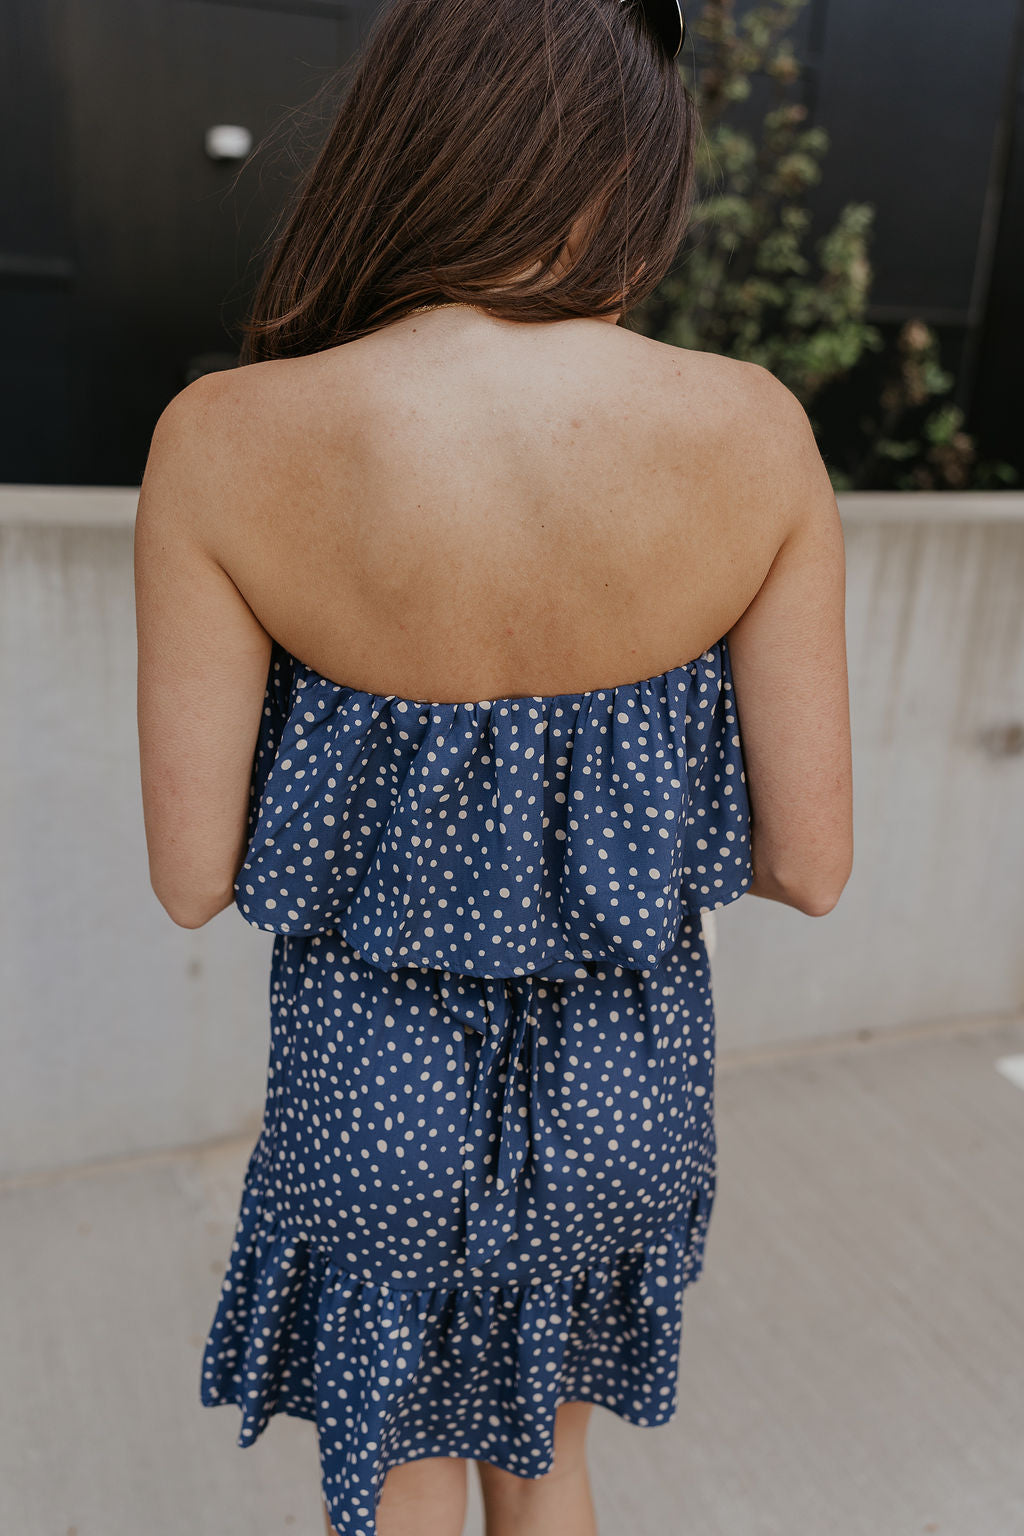 Back view of female model wearing the Lena Navy & White Polka Dot Strapless Mini Dress which features Navy and Cream Polka Dot Design, Ruffle Hem Skirt, Upper Ruffle Detail and Strapless